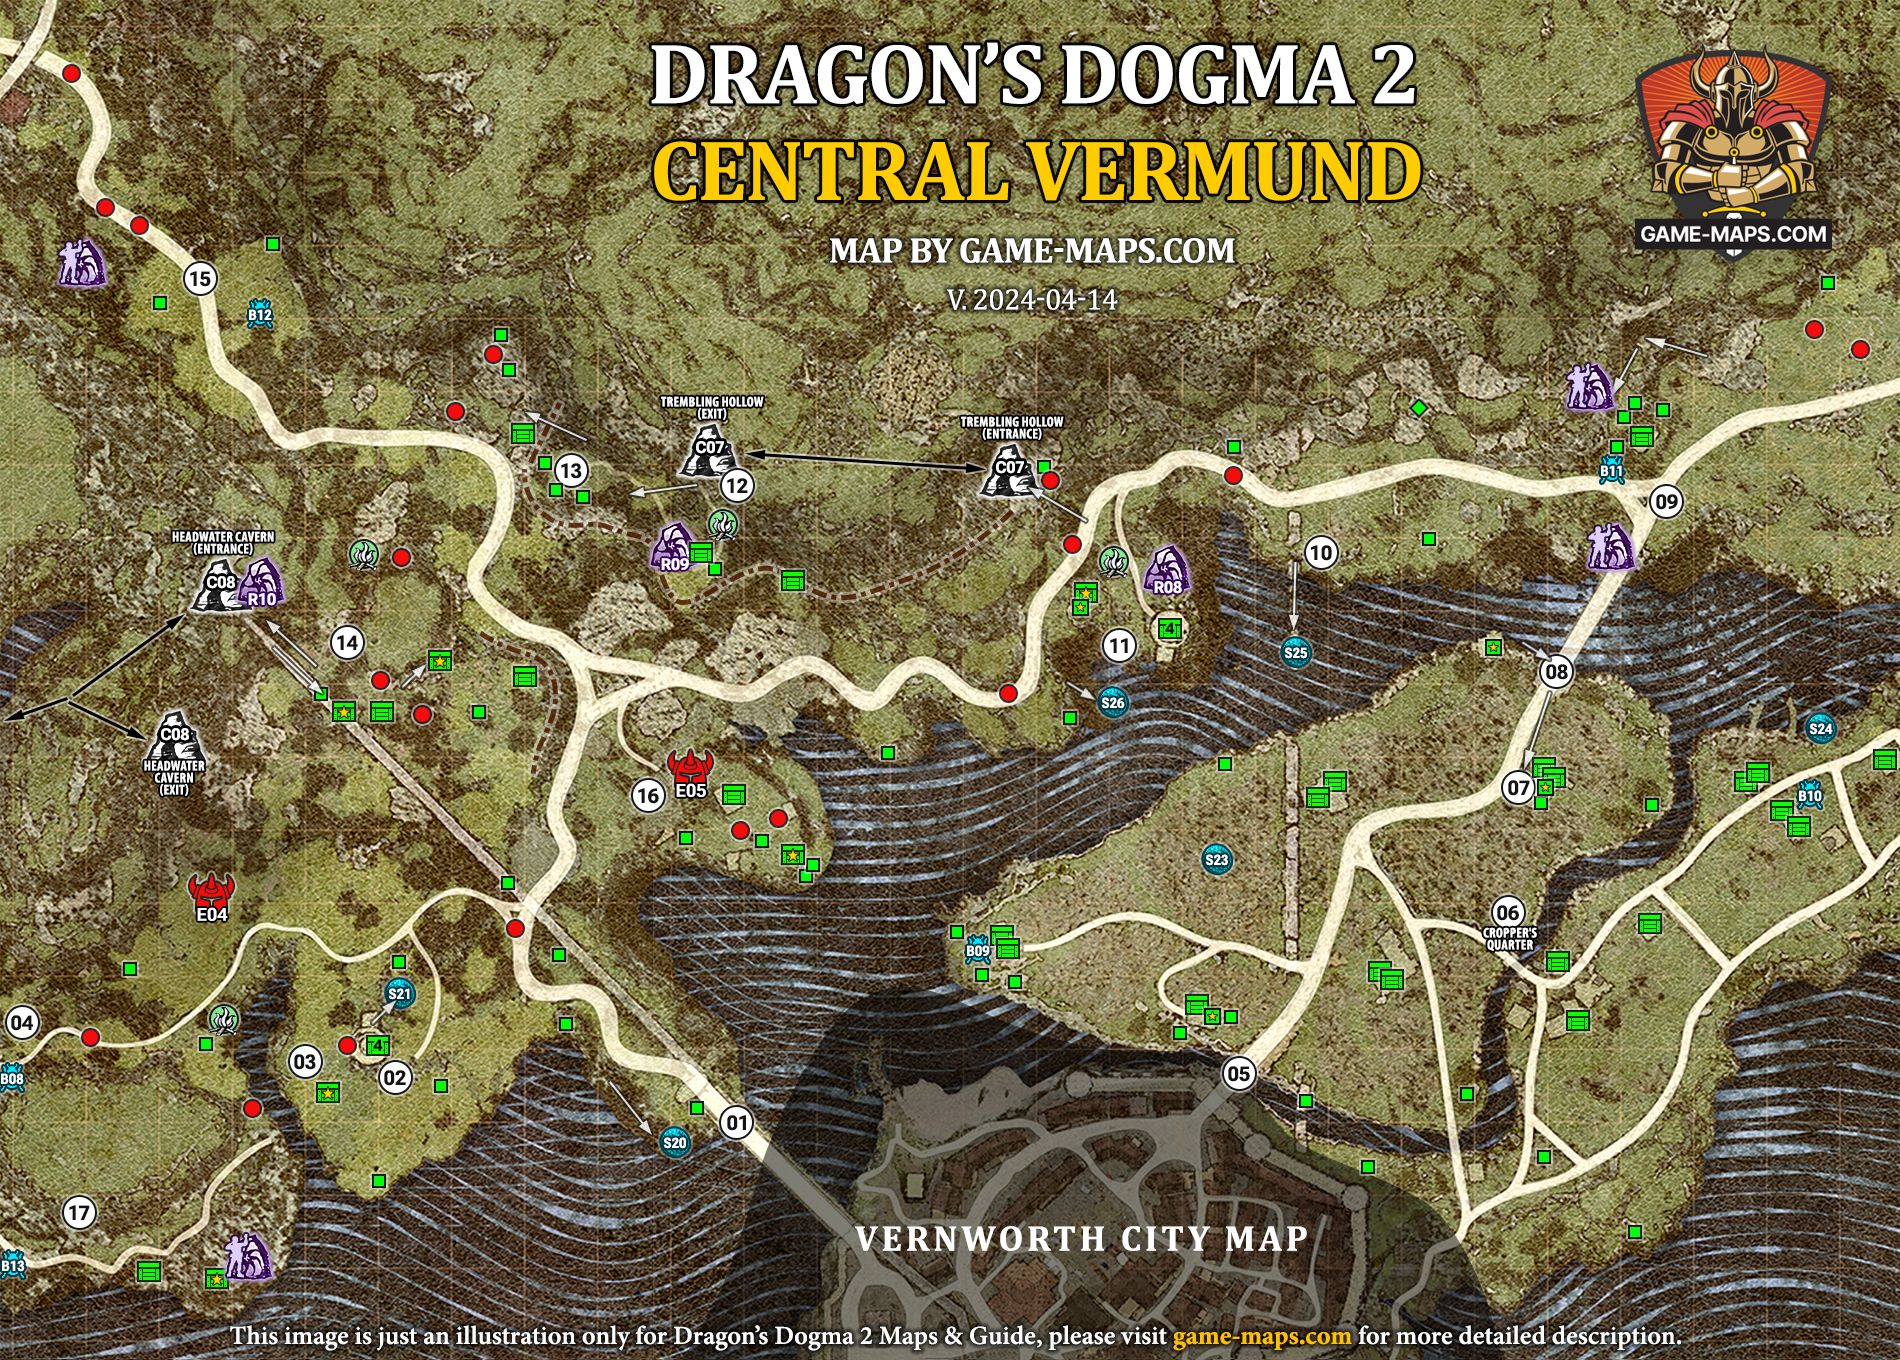 Map of Central Vermund in Dragon's Dogma 2